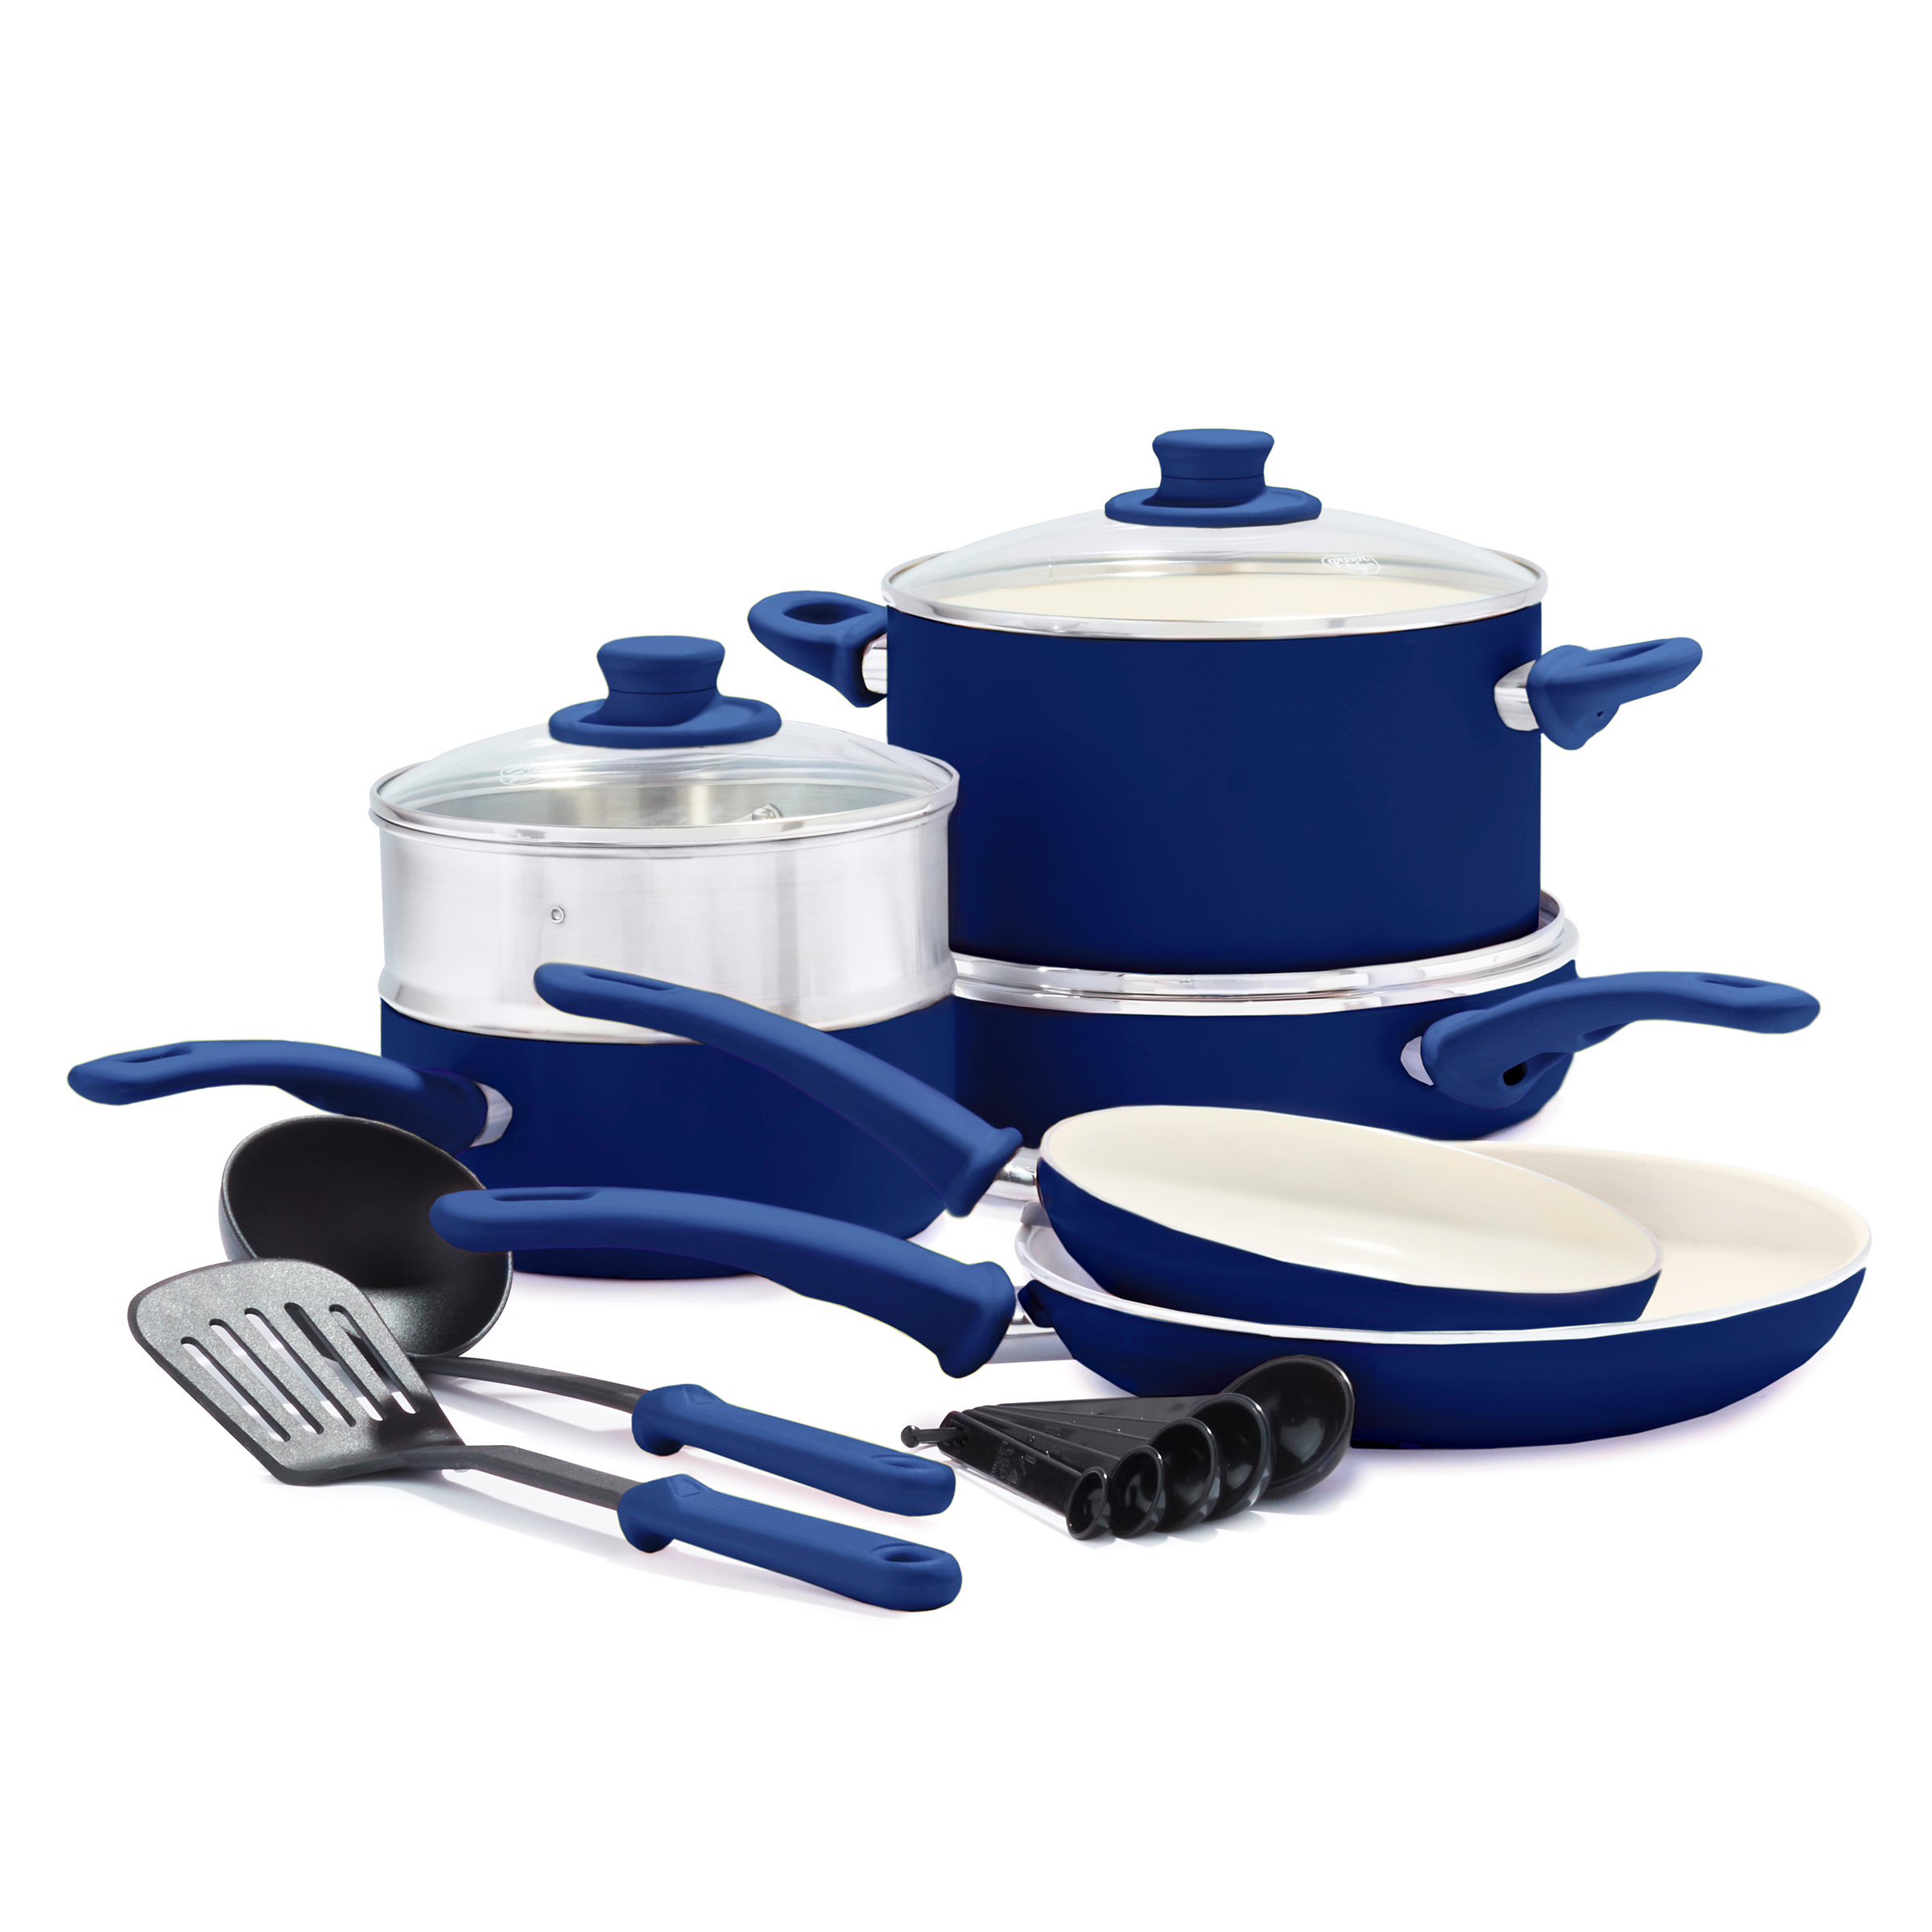 Greenlife Diamond Healthy Ceramic Extra Non-stick 13Pc Cookware Set  Turquoise